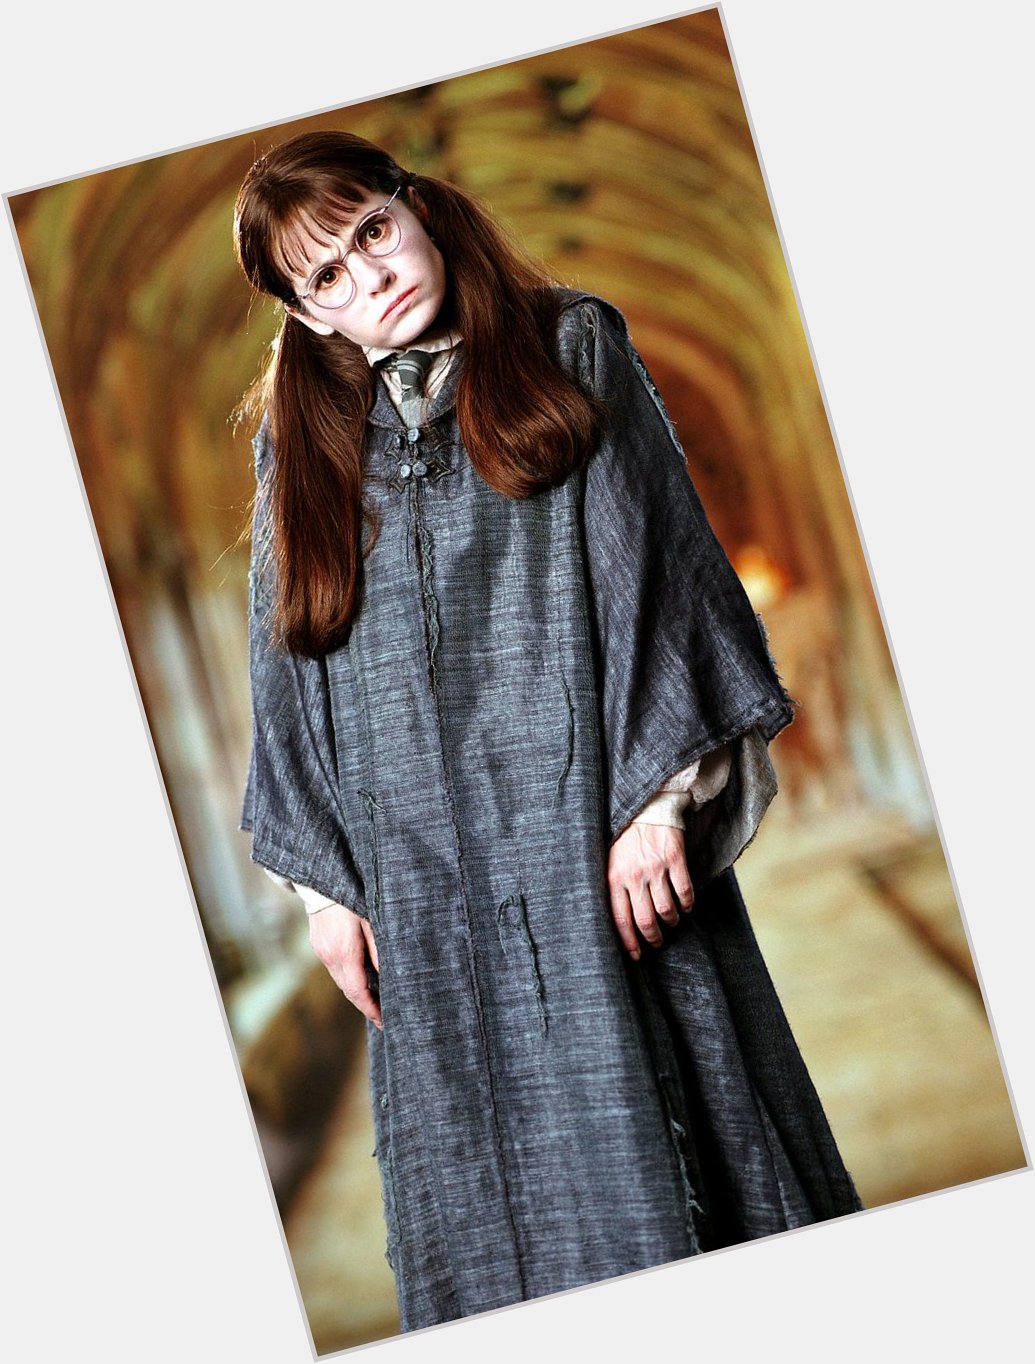 Happy birthday to Shirley Henderson, Moaning Myrtle in the Harry Potter series, who turns 50 yrs old Nov. 24, 2015! 